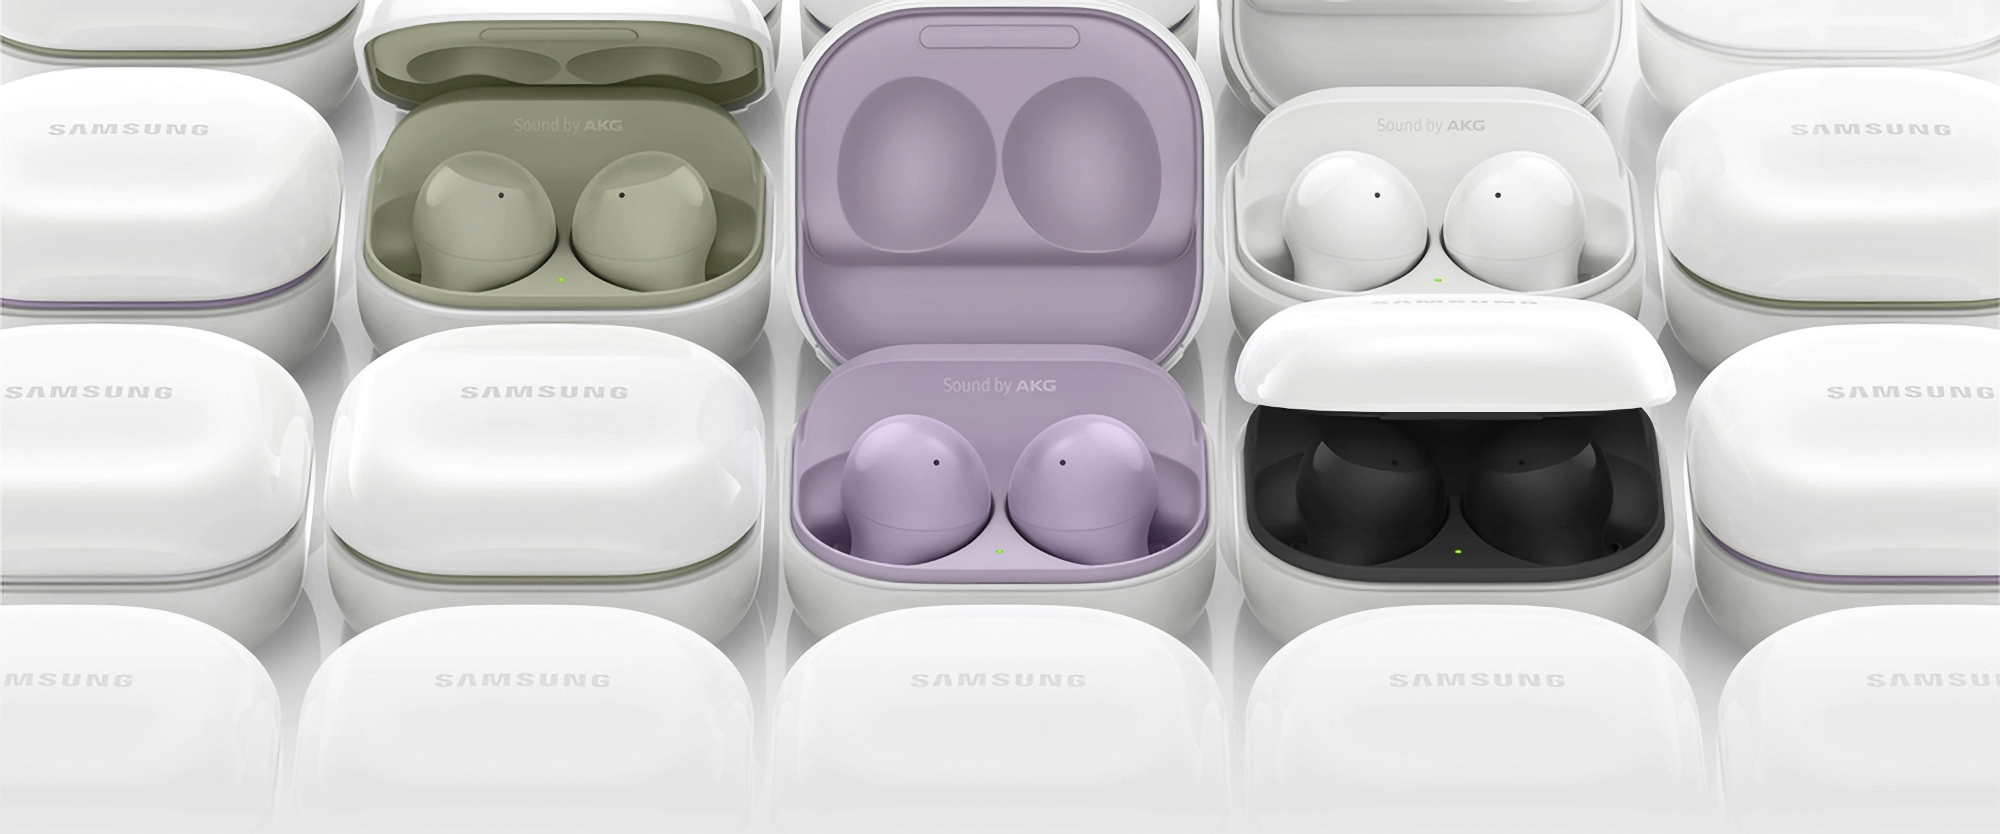 ANC, 360 Audio support and up to 24 hours of battery life: insider reveals details about Samsung Galaxy Buds 3